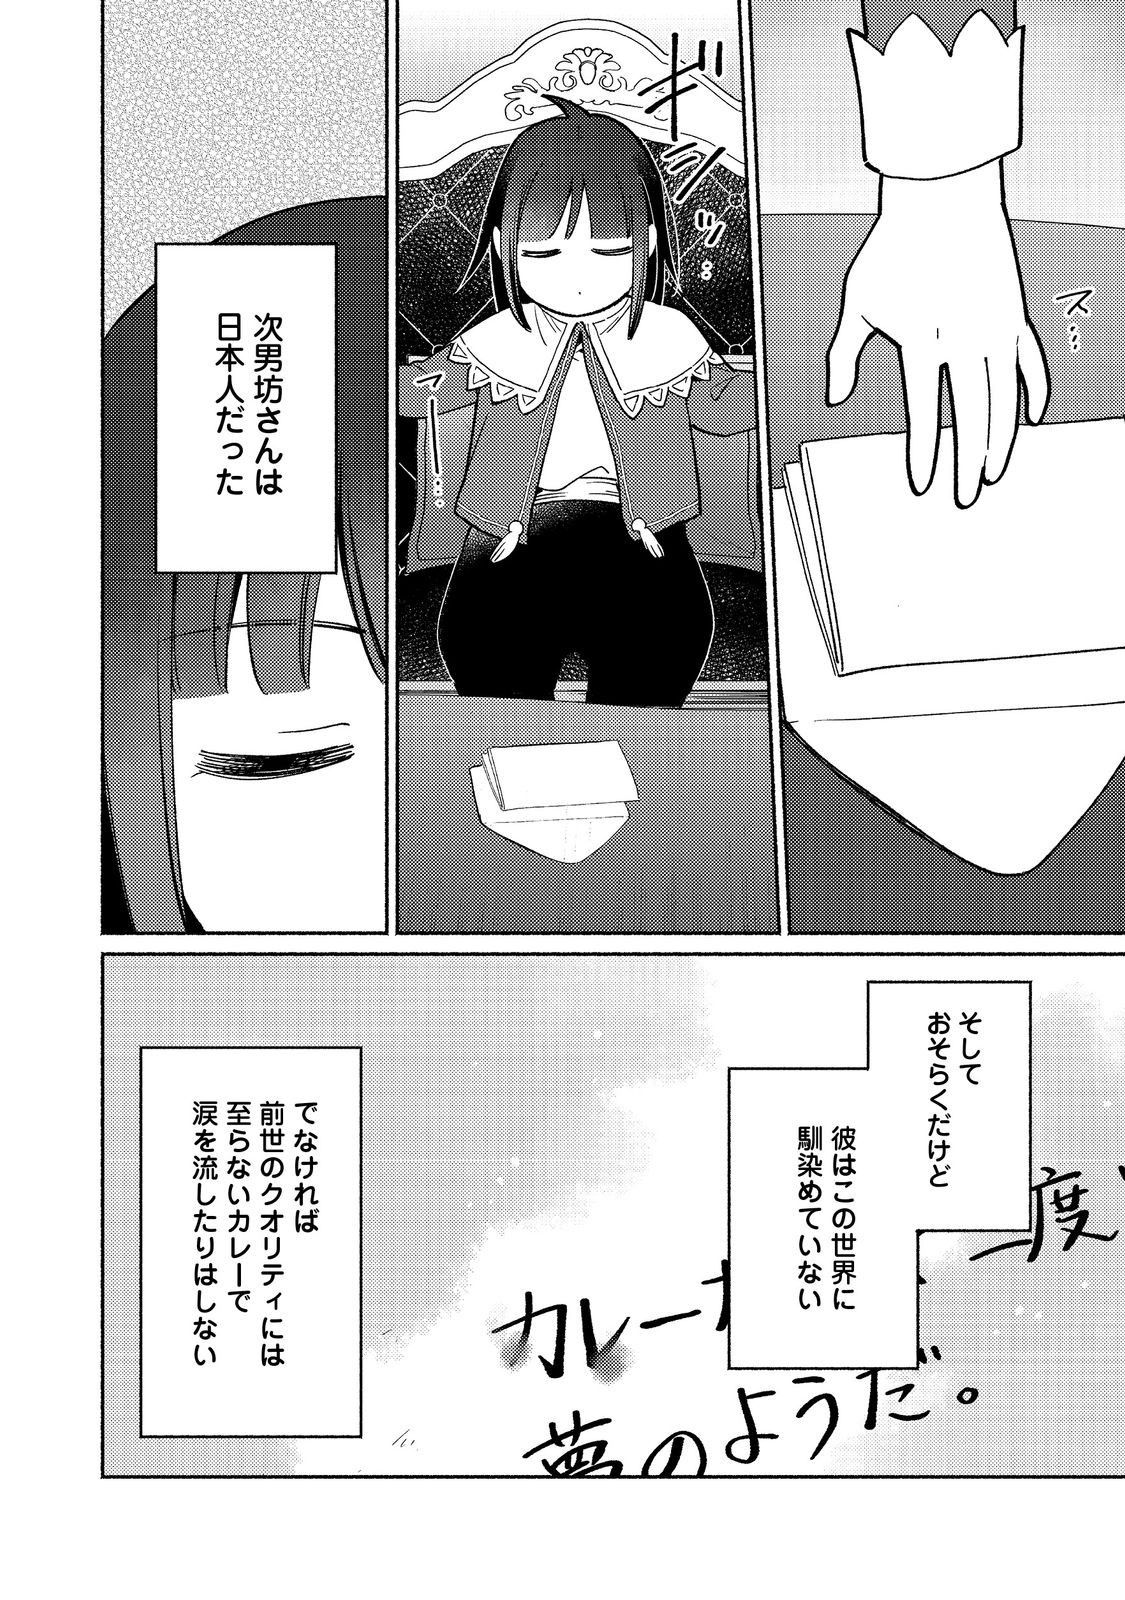 I’m the White Pig Nobleman 第23.1話 - Page 10